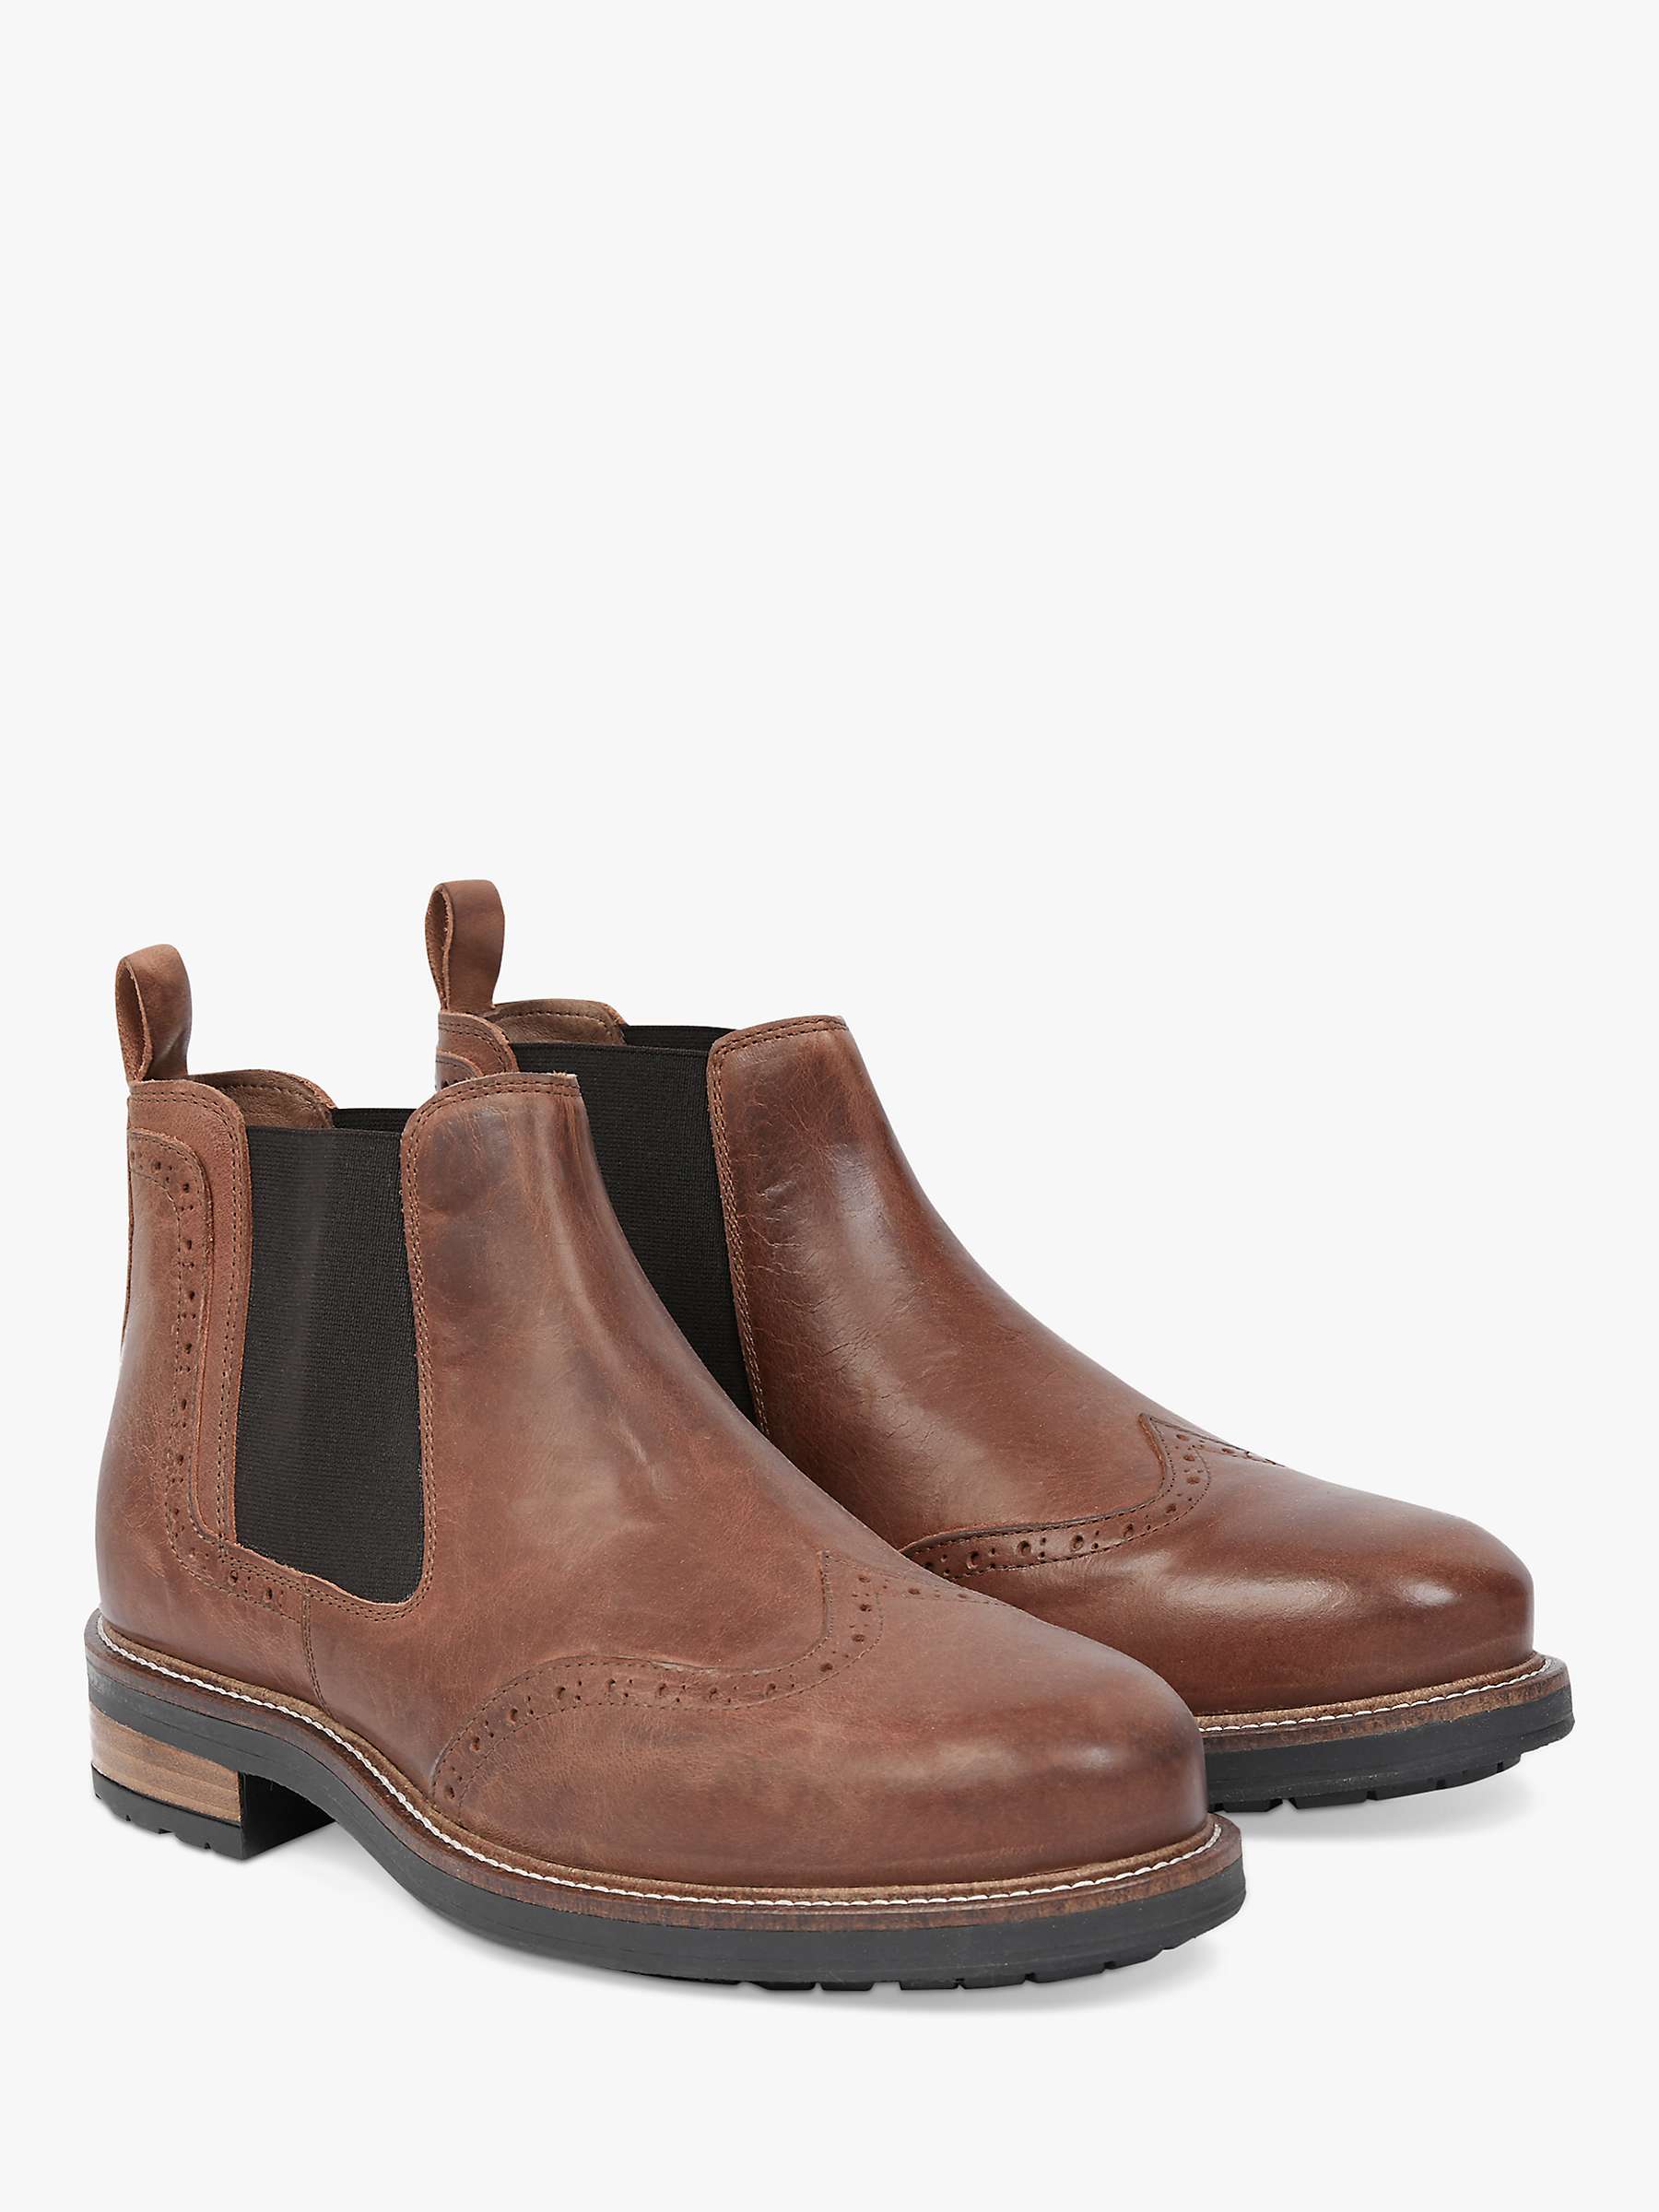 Buy Celtic & Co. Leather Chelsea Brogue Boots, Antique Brown Online at johnlewis.com